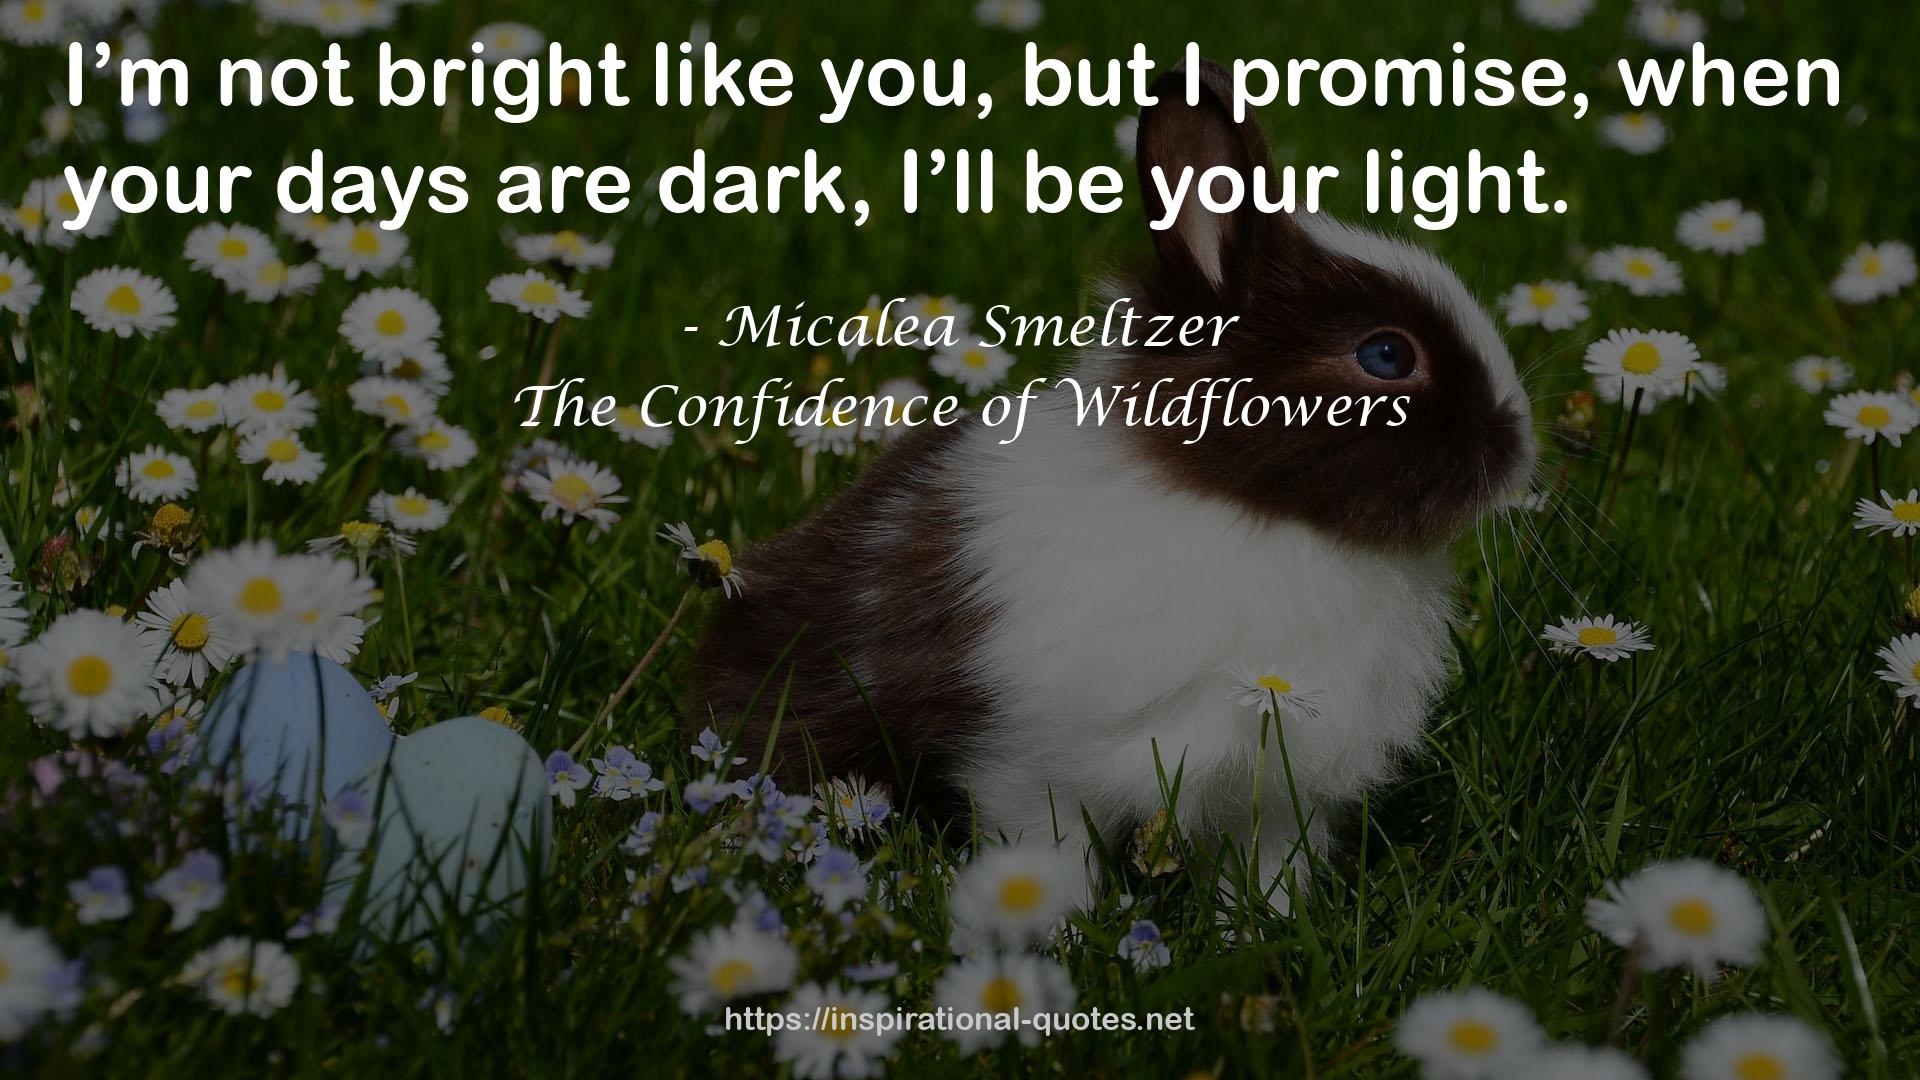 The Confidence of Wildflowers QUOTES